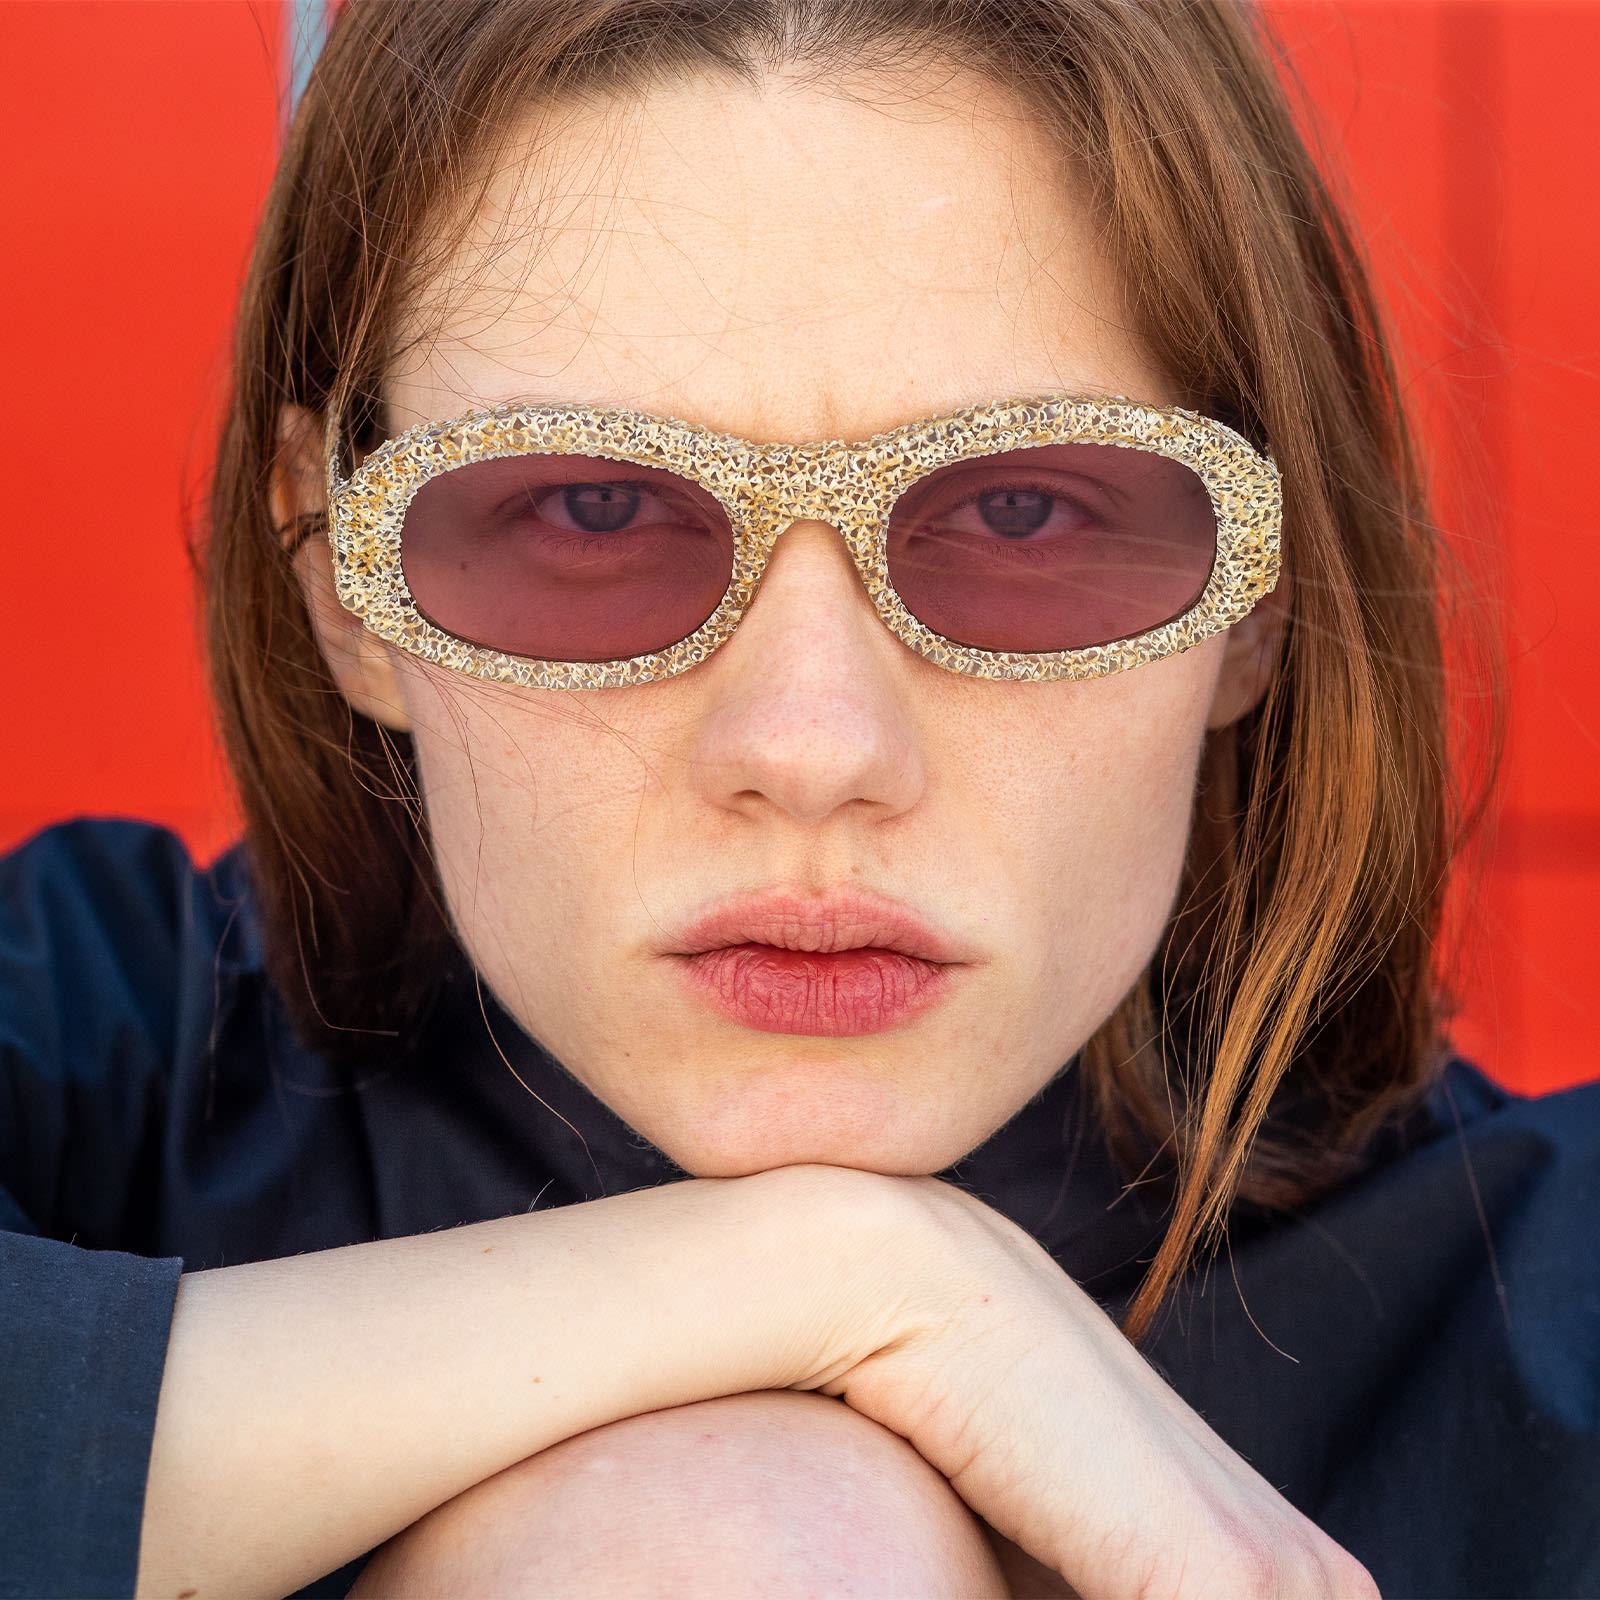 The indie eyewear brands setting their sights on success